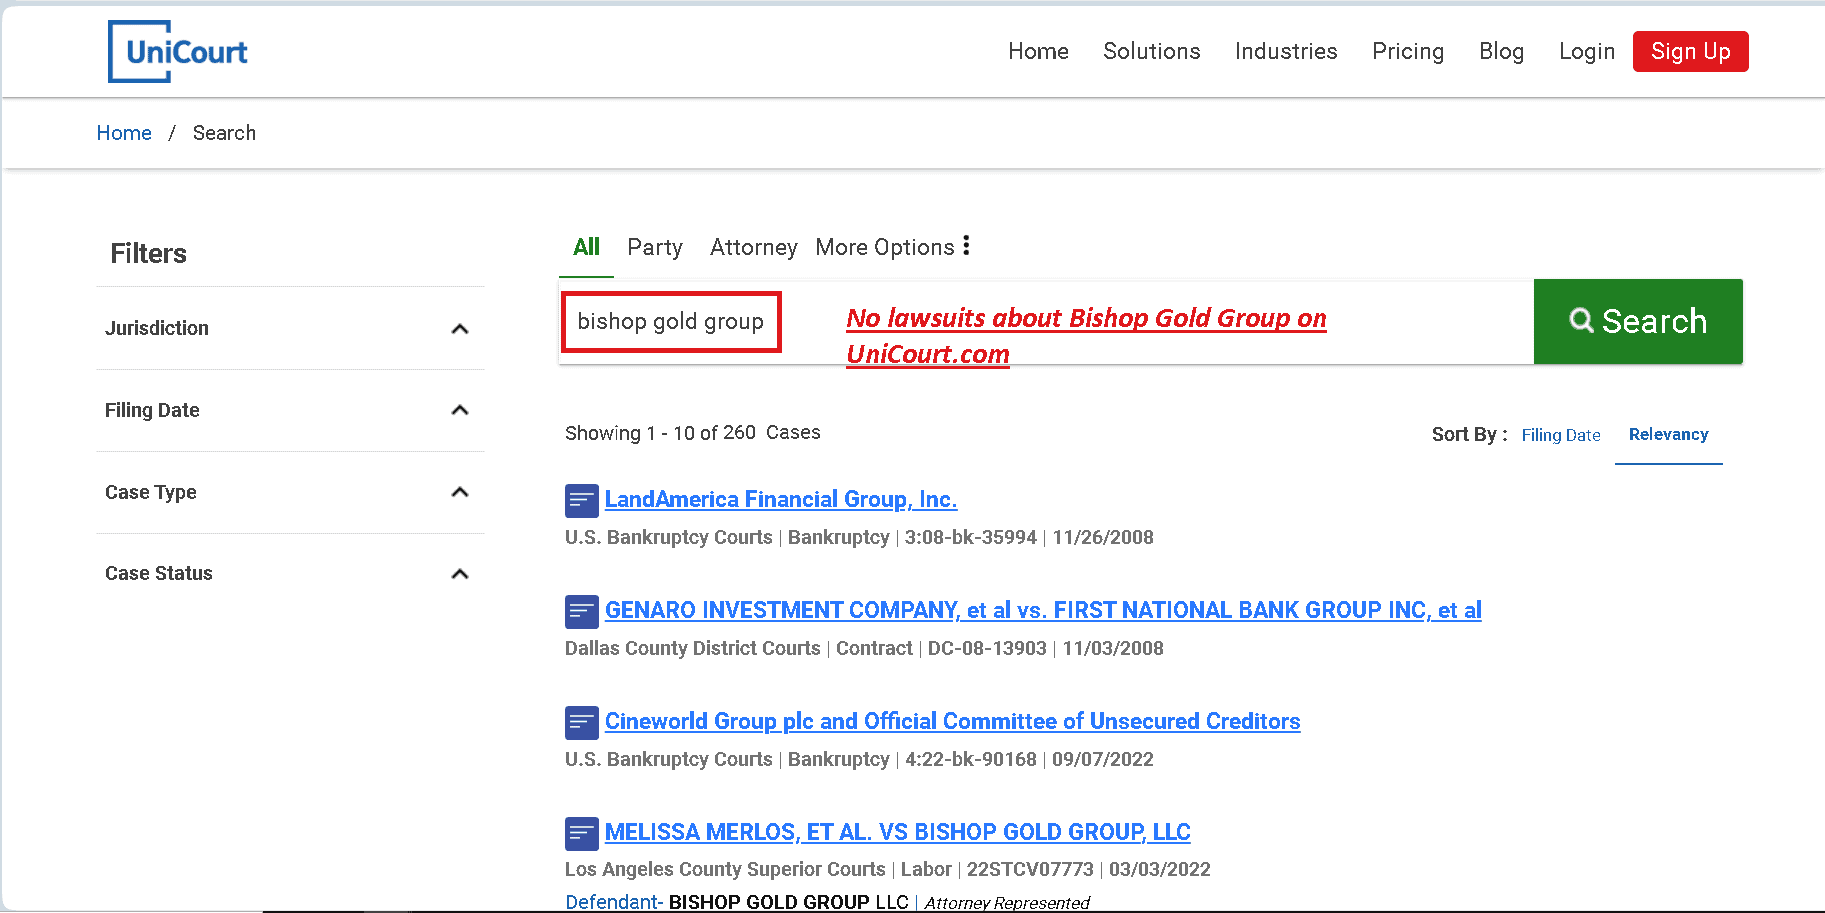 No lawsuits about Bishop Gold Group on UniCourt.com